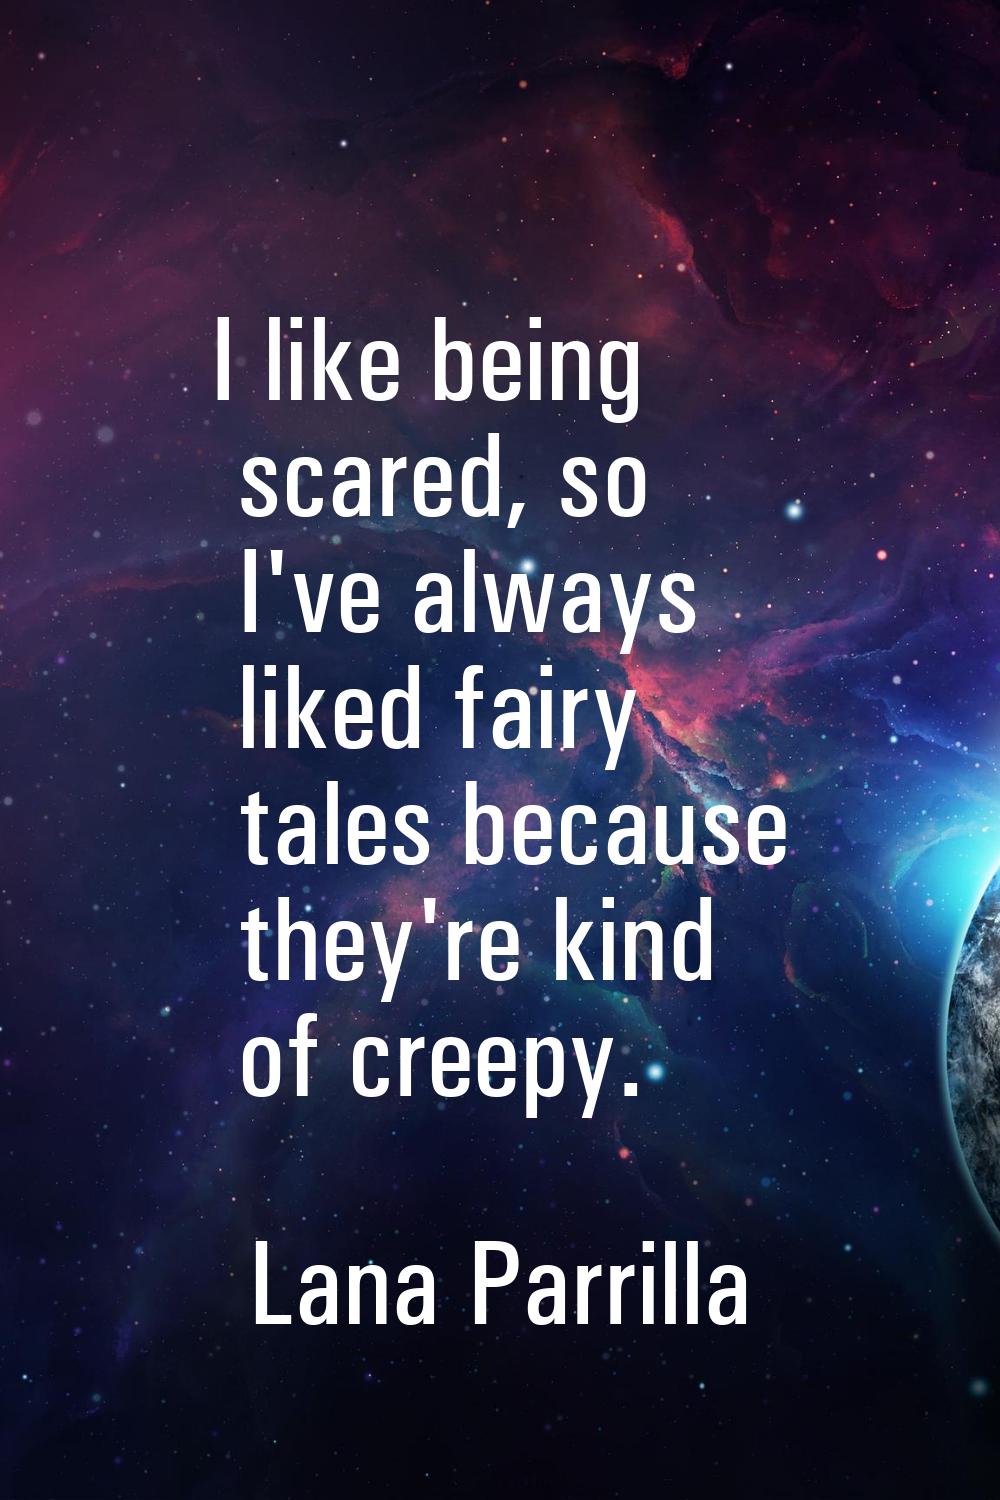 I like being scared, so I've always liked fairy tales because they're kind of creepy.